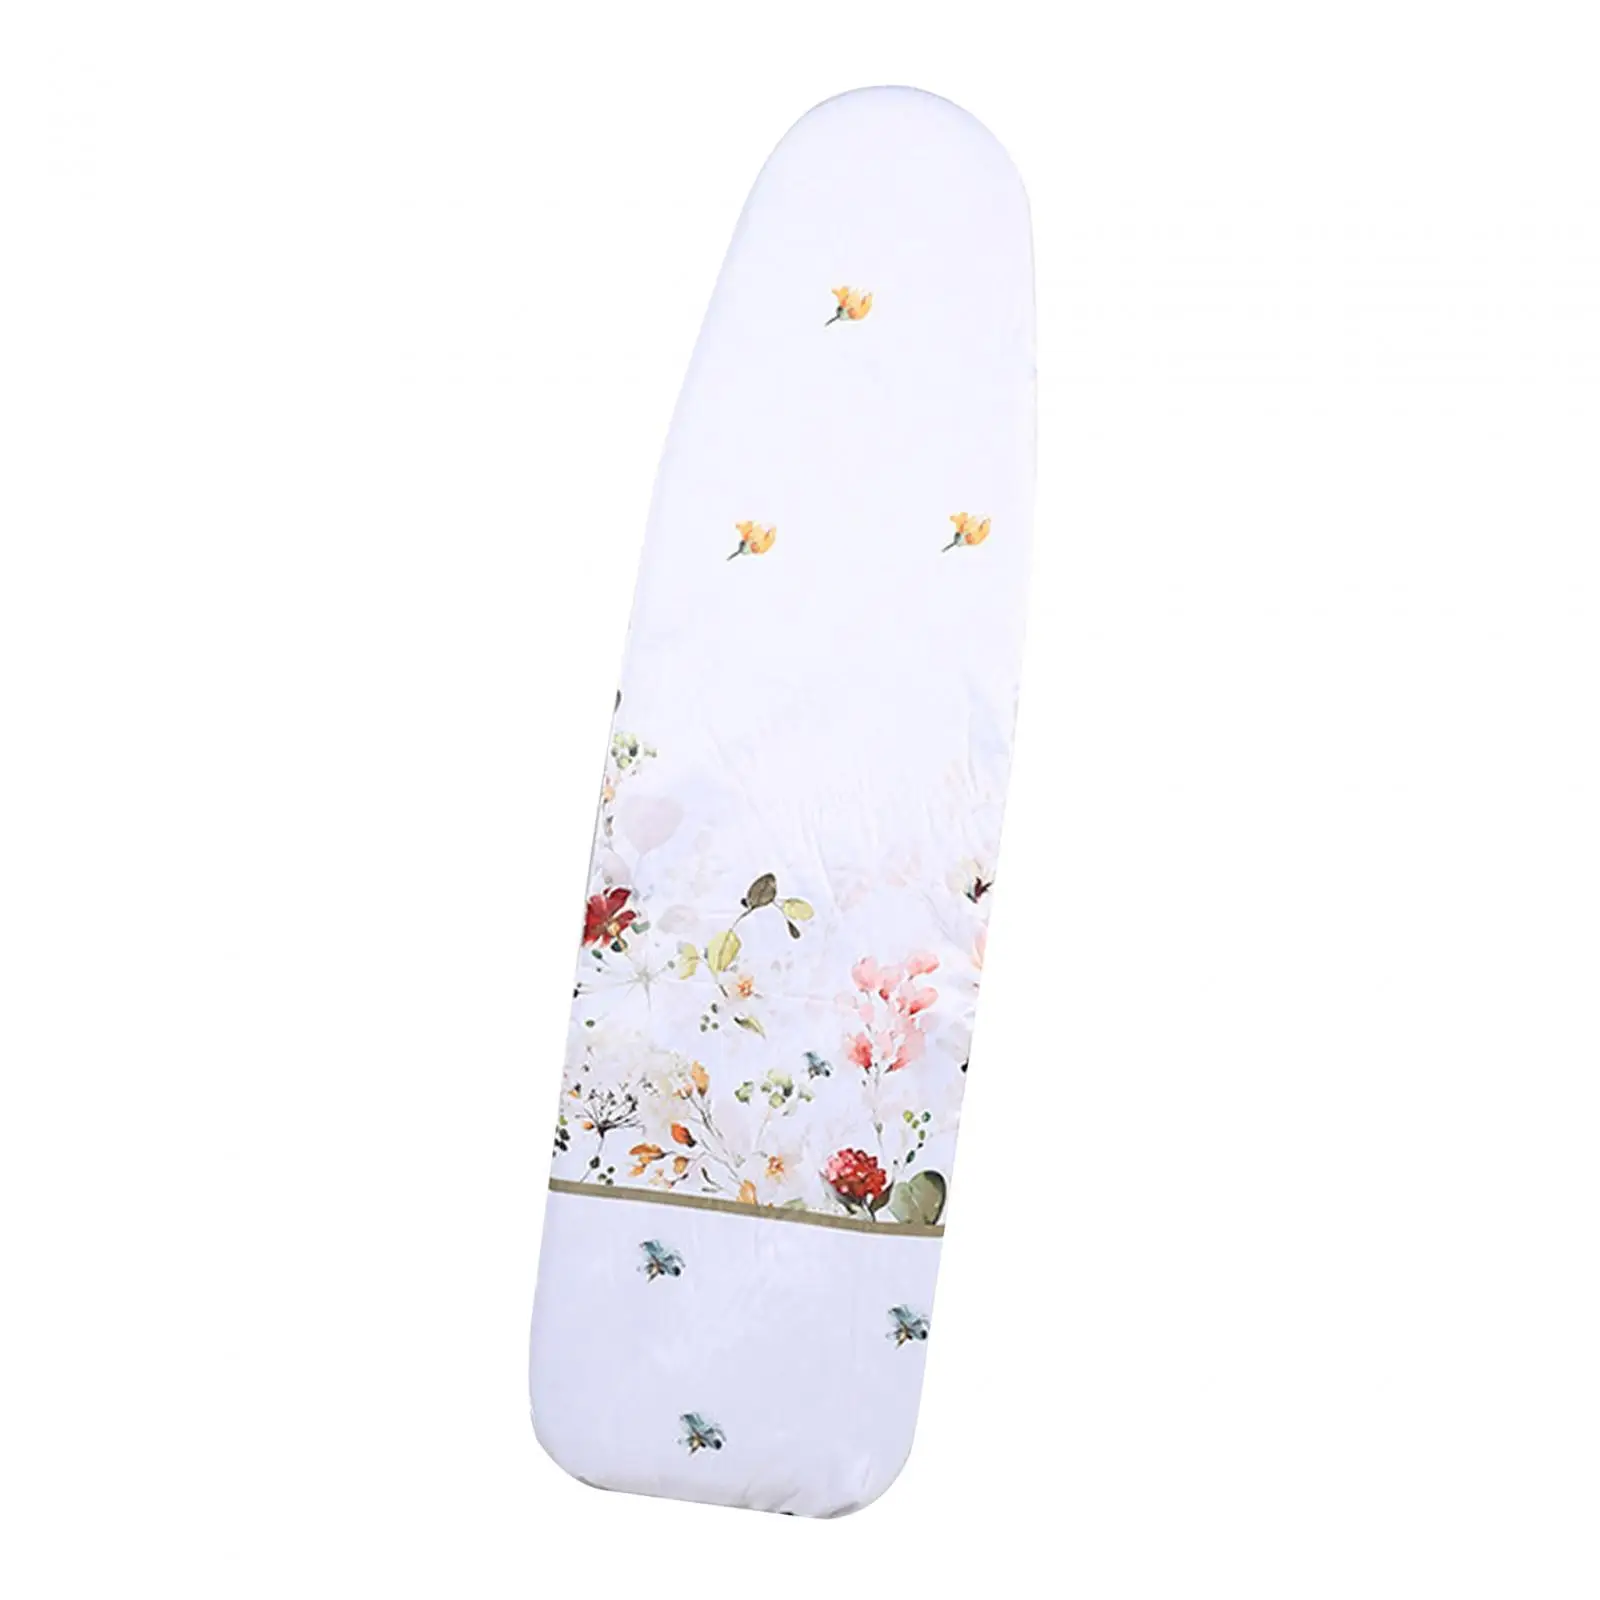 Ironing Board Protective Cover Heat Resistant Cover with Drawstring Portable Ironing Board Cover Ironing Board Dustproof Cover